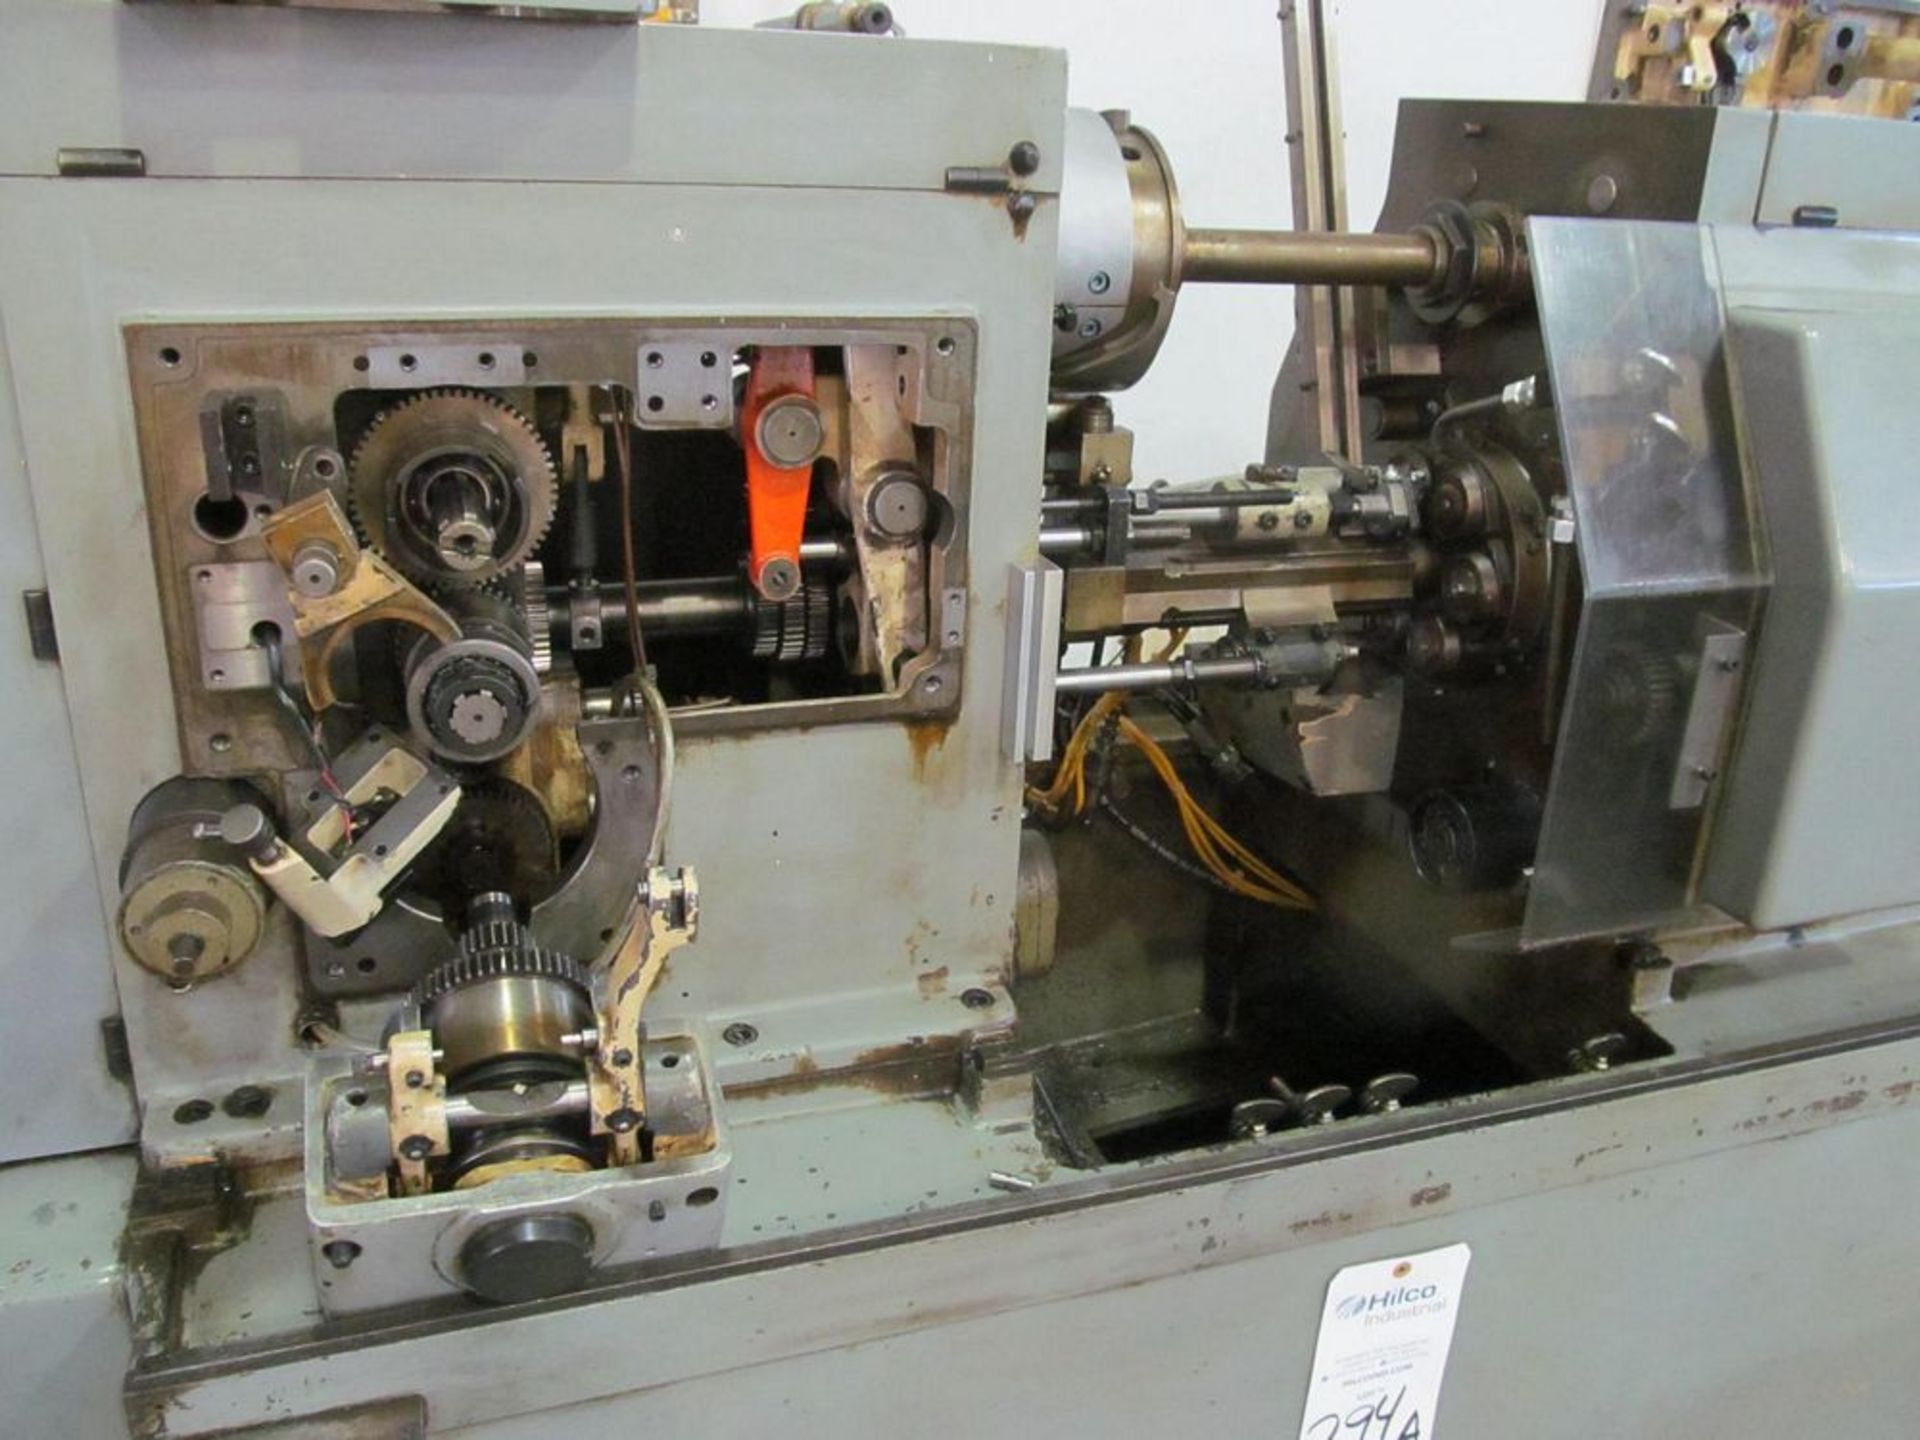 Tornos Model AS14 6-Spindle Screw Machine - Image 2 of 2